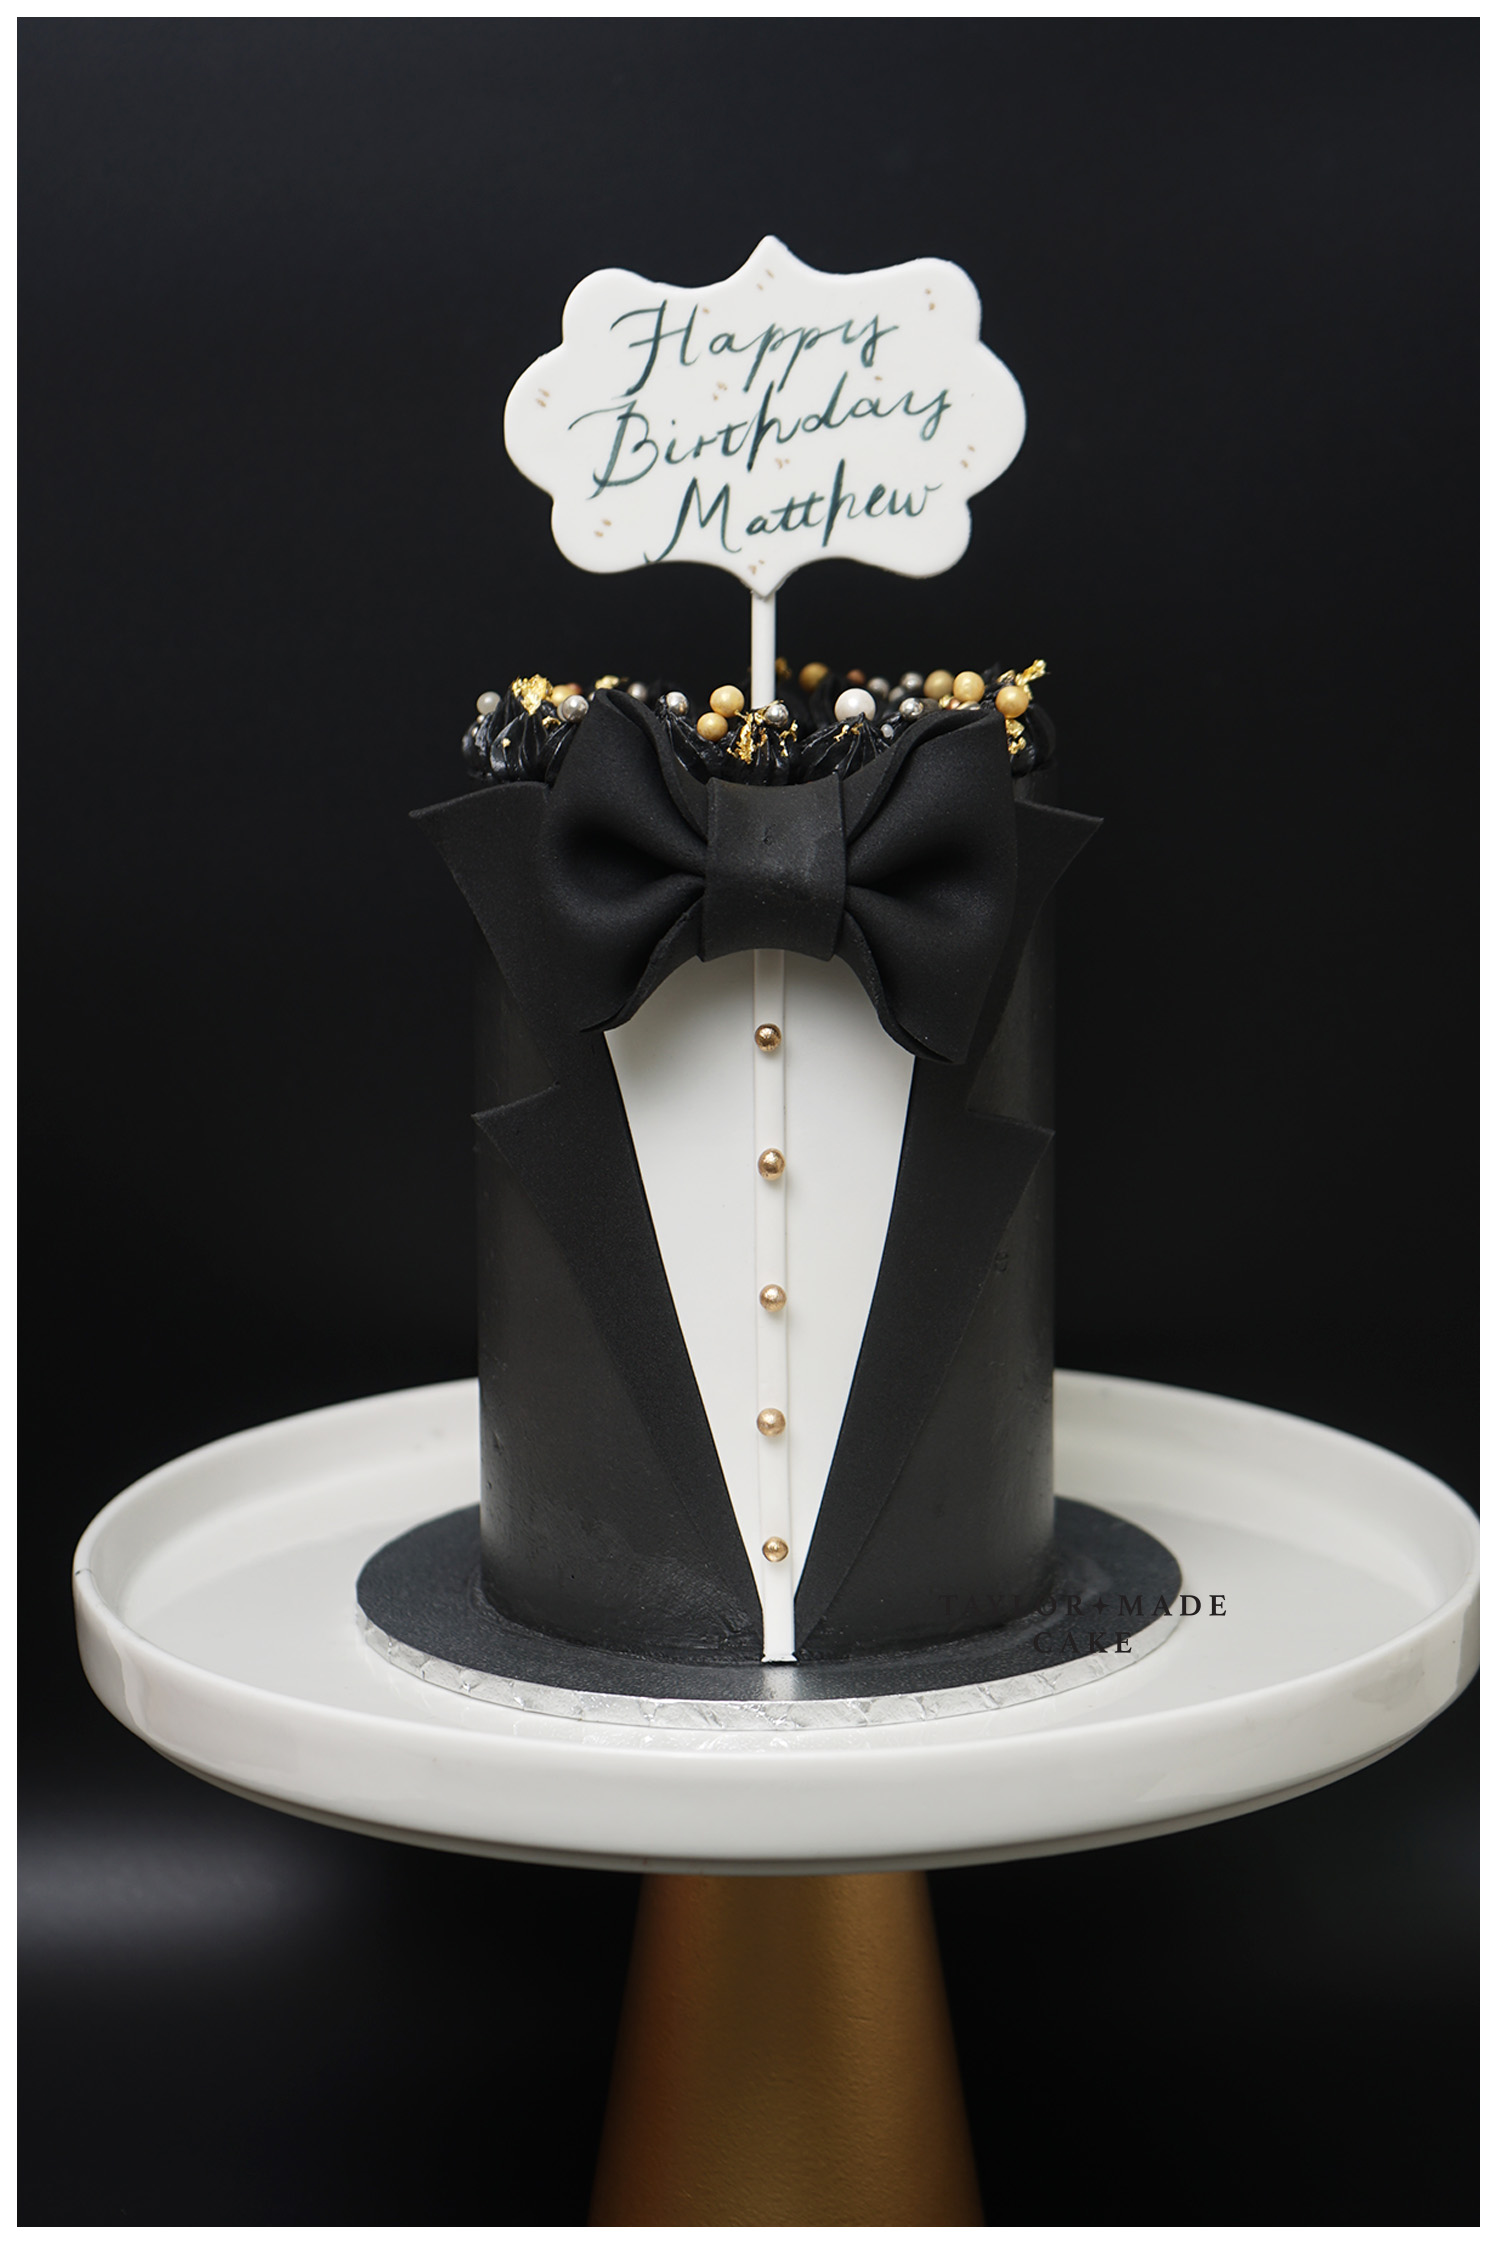 Gentleman Themed Birthday Cake with Name Editor - Best Wishes Birthday  Wishes With Name